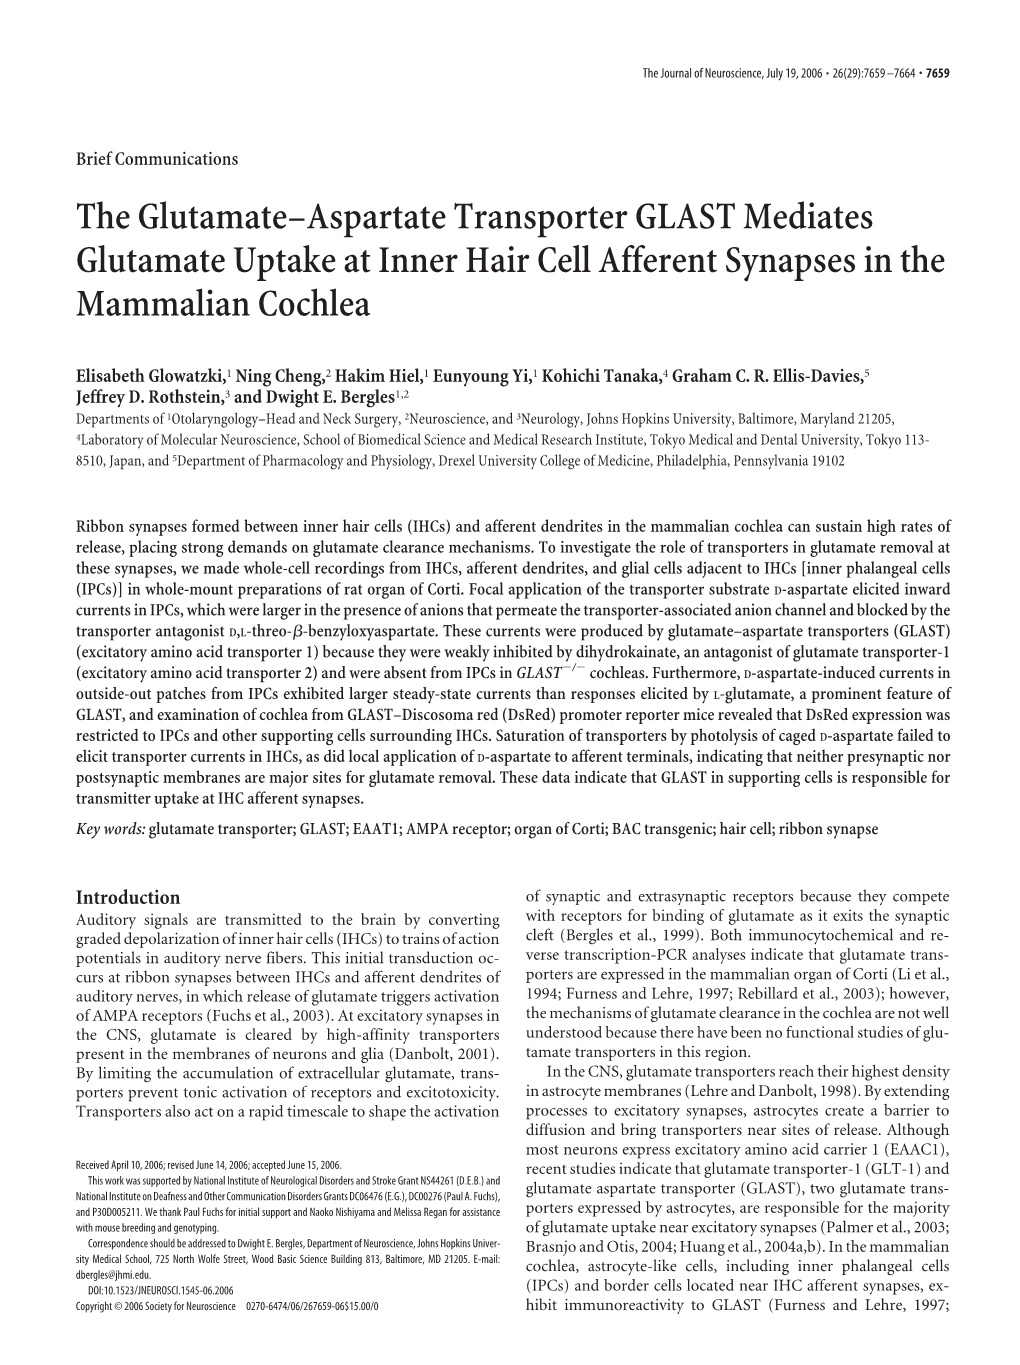 The Glutamate–Aspartate Transporter GLAST Mediates Glutamate Uptake at Inner Hair Cell Afferent Synapses in the Mammalian Cochlea